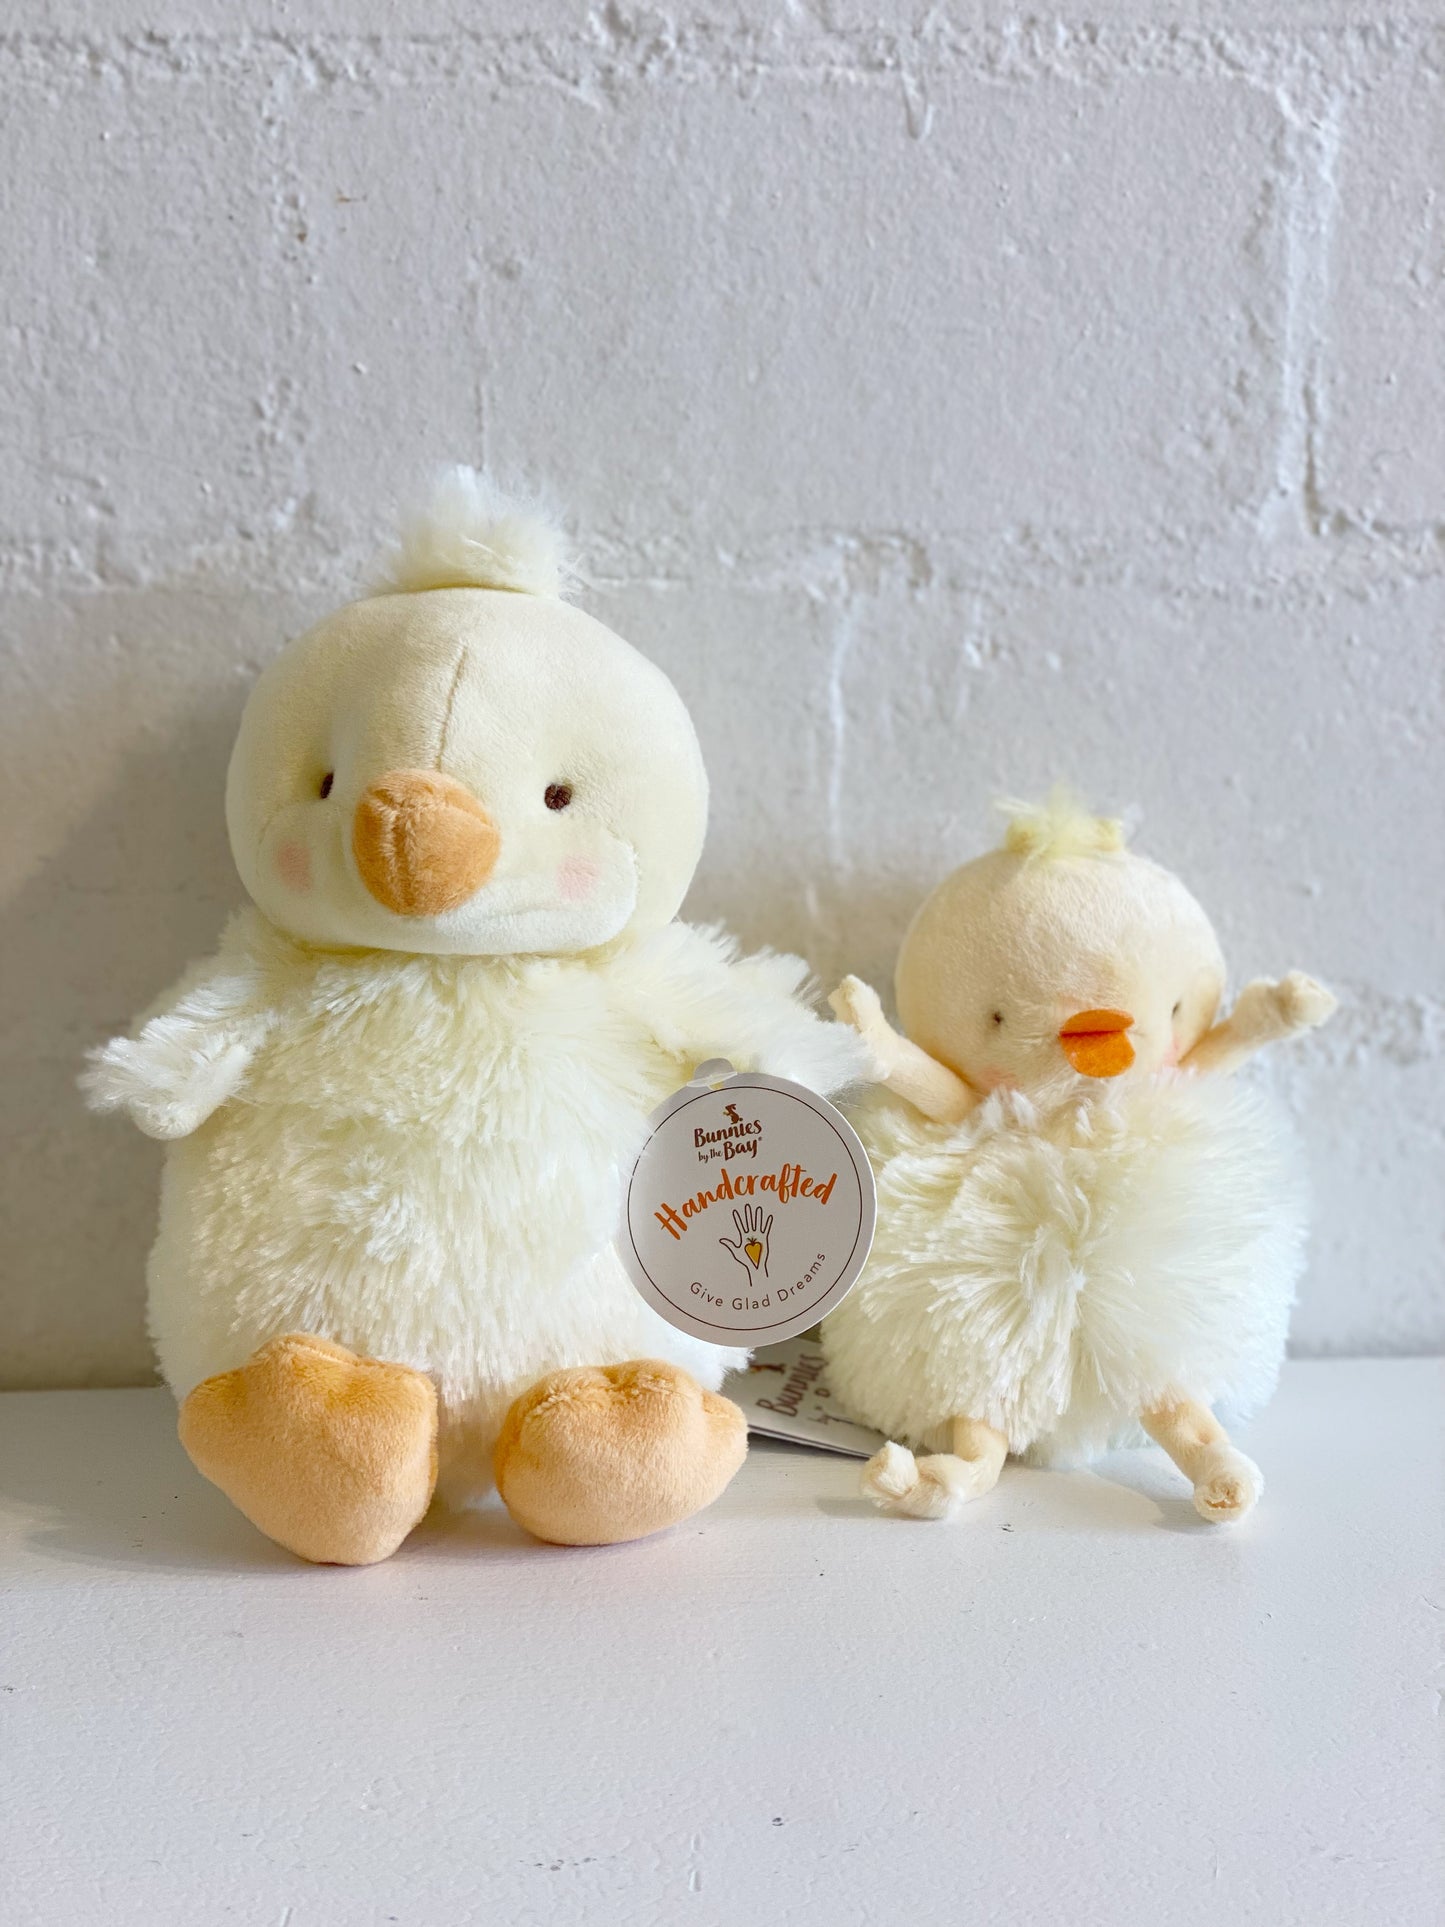 Roly Poly Peep Plush Chick -Bunnies by the Bay